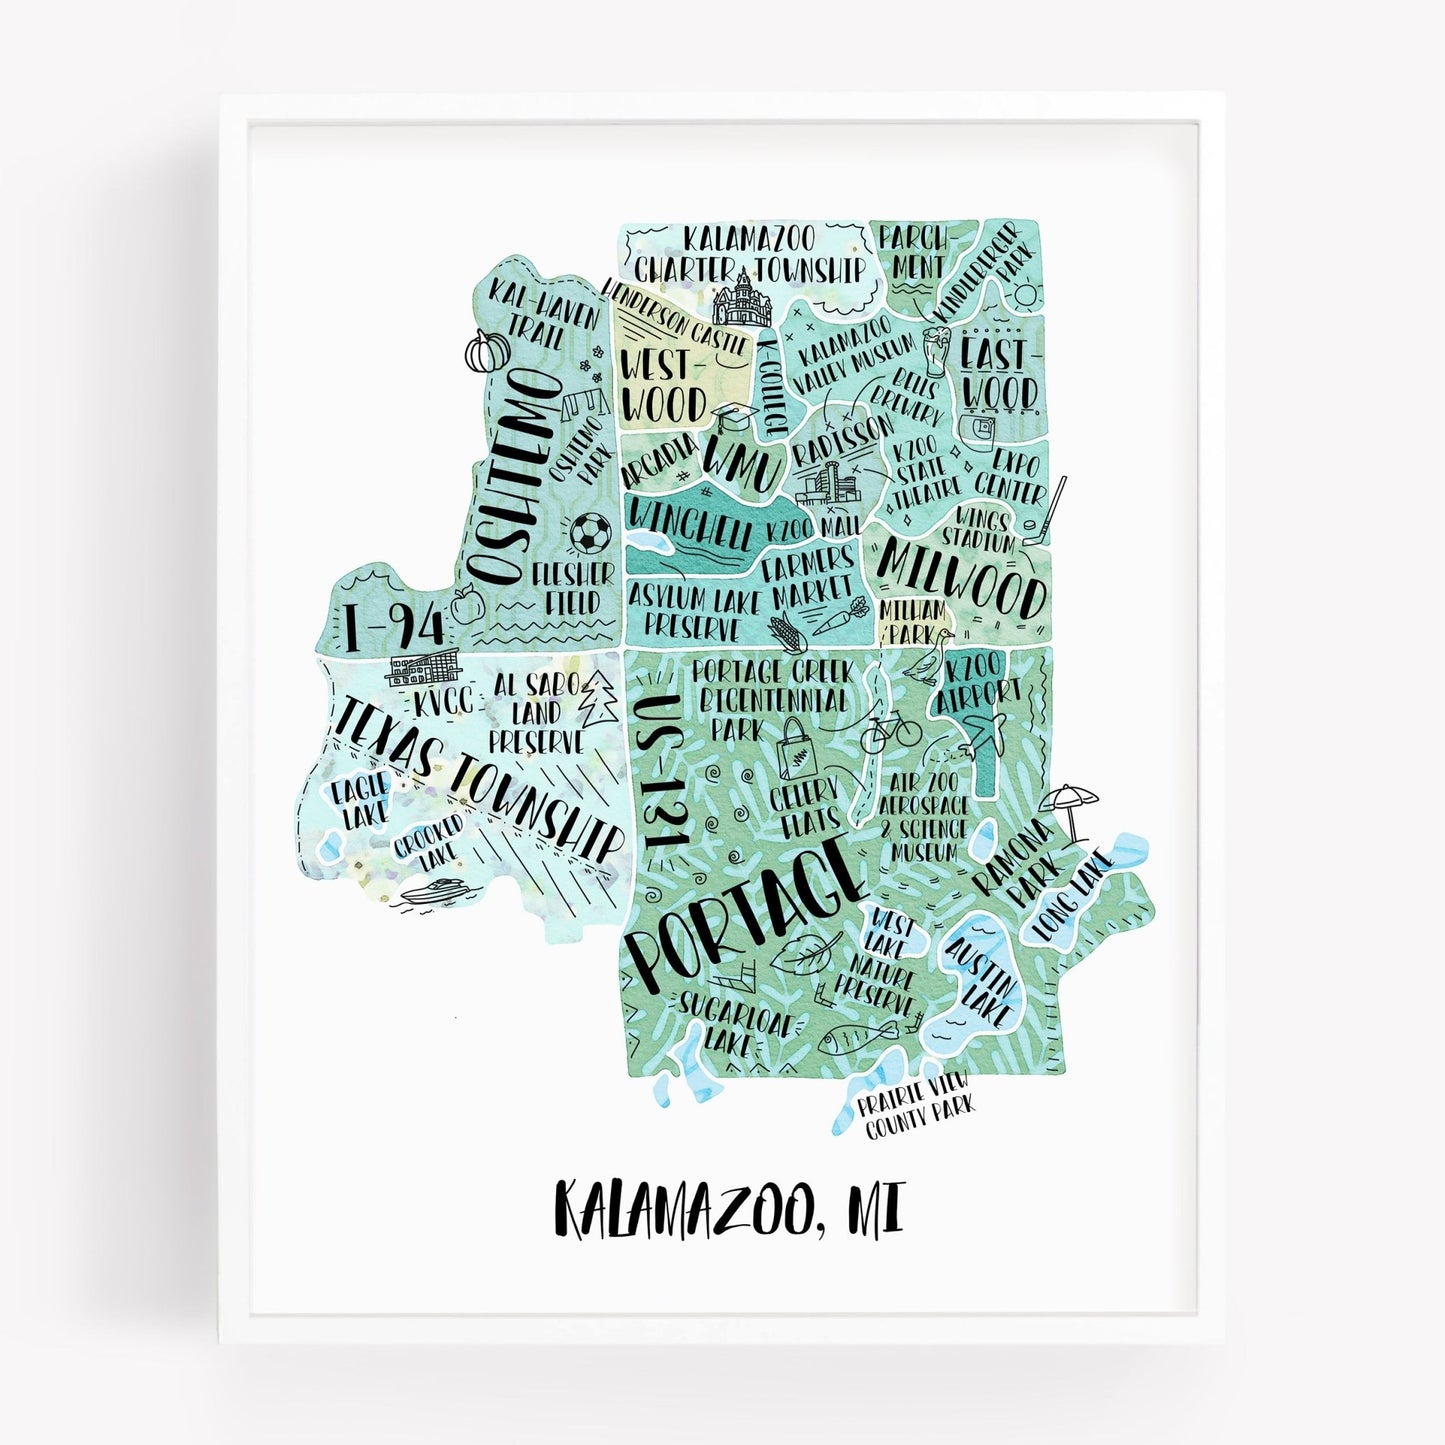 An illustrated map of Kalamazoo Michigan, as a print, in the color teal